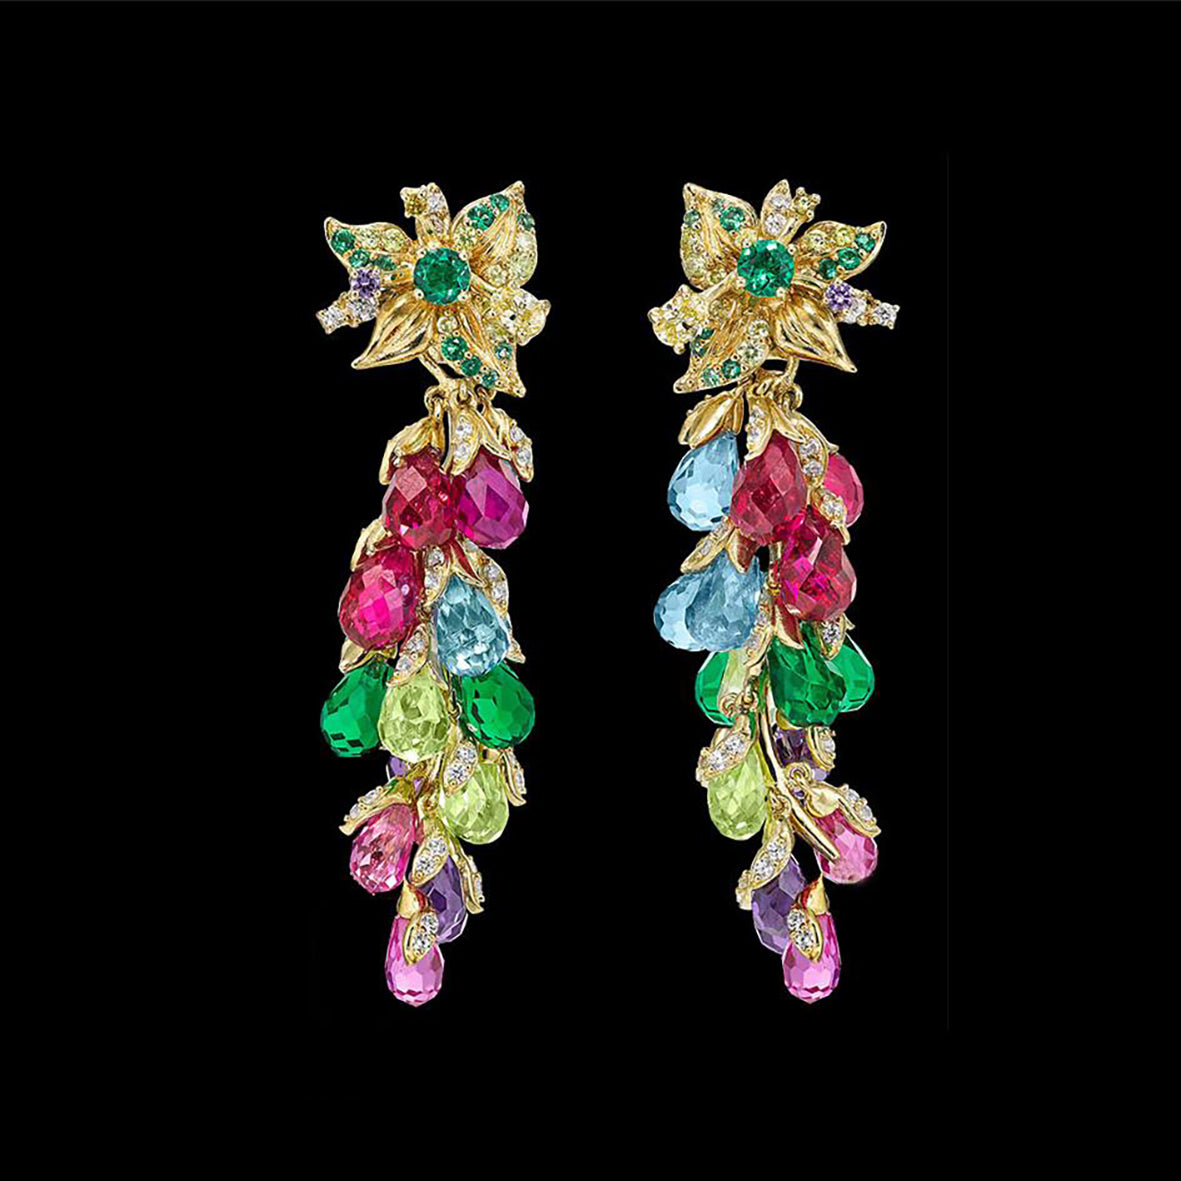 Rainbow Coralbell Earrings, Earring, Anabela Chan Joaillerie - Fine jewelry with laboratory grown and created gemstones hand-crafted in the United Kingdom. Anabela Chan Joaillerie is the first fine jewellery brand in the world to champion laboratory-grown and created gemstones with high jewellery design, artisanal craftsmanship and a focus on ethical and sustainable innovations.